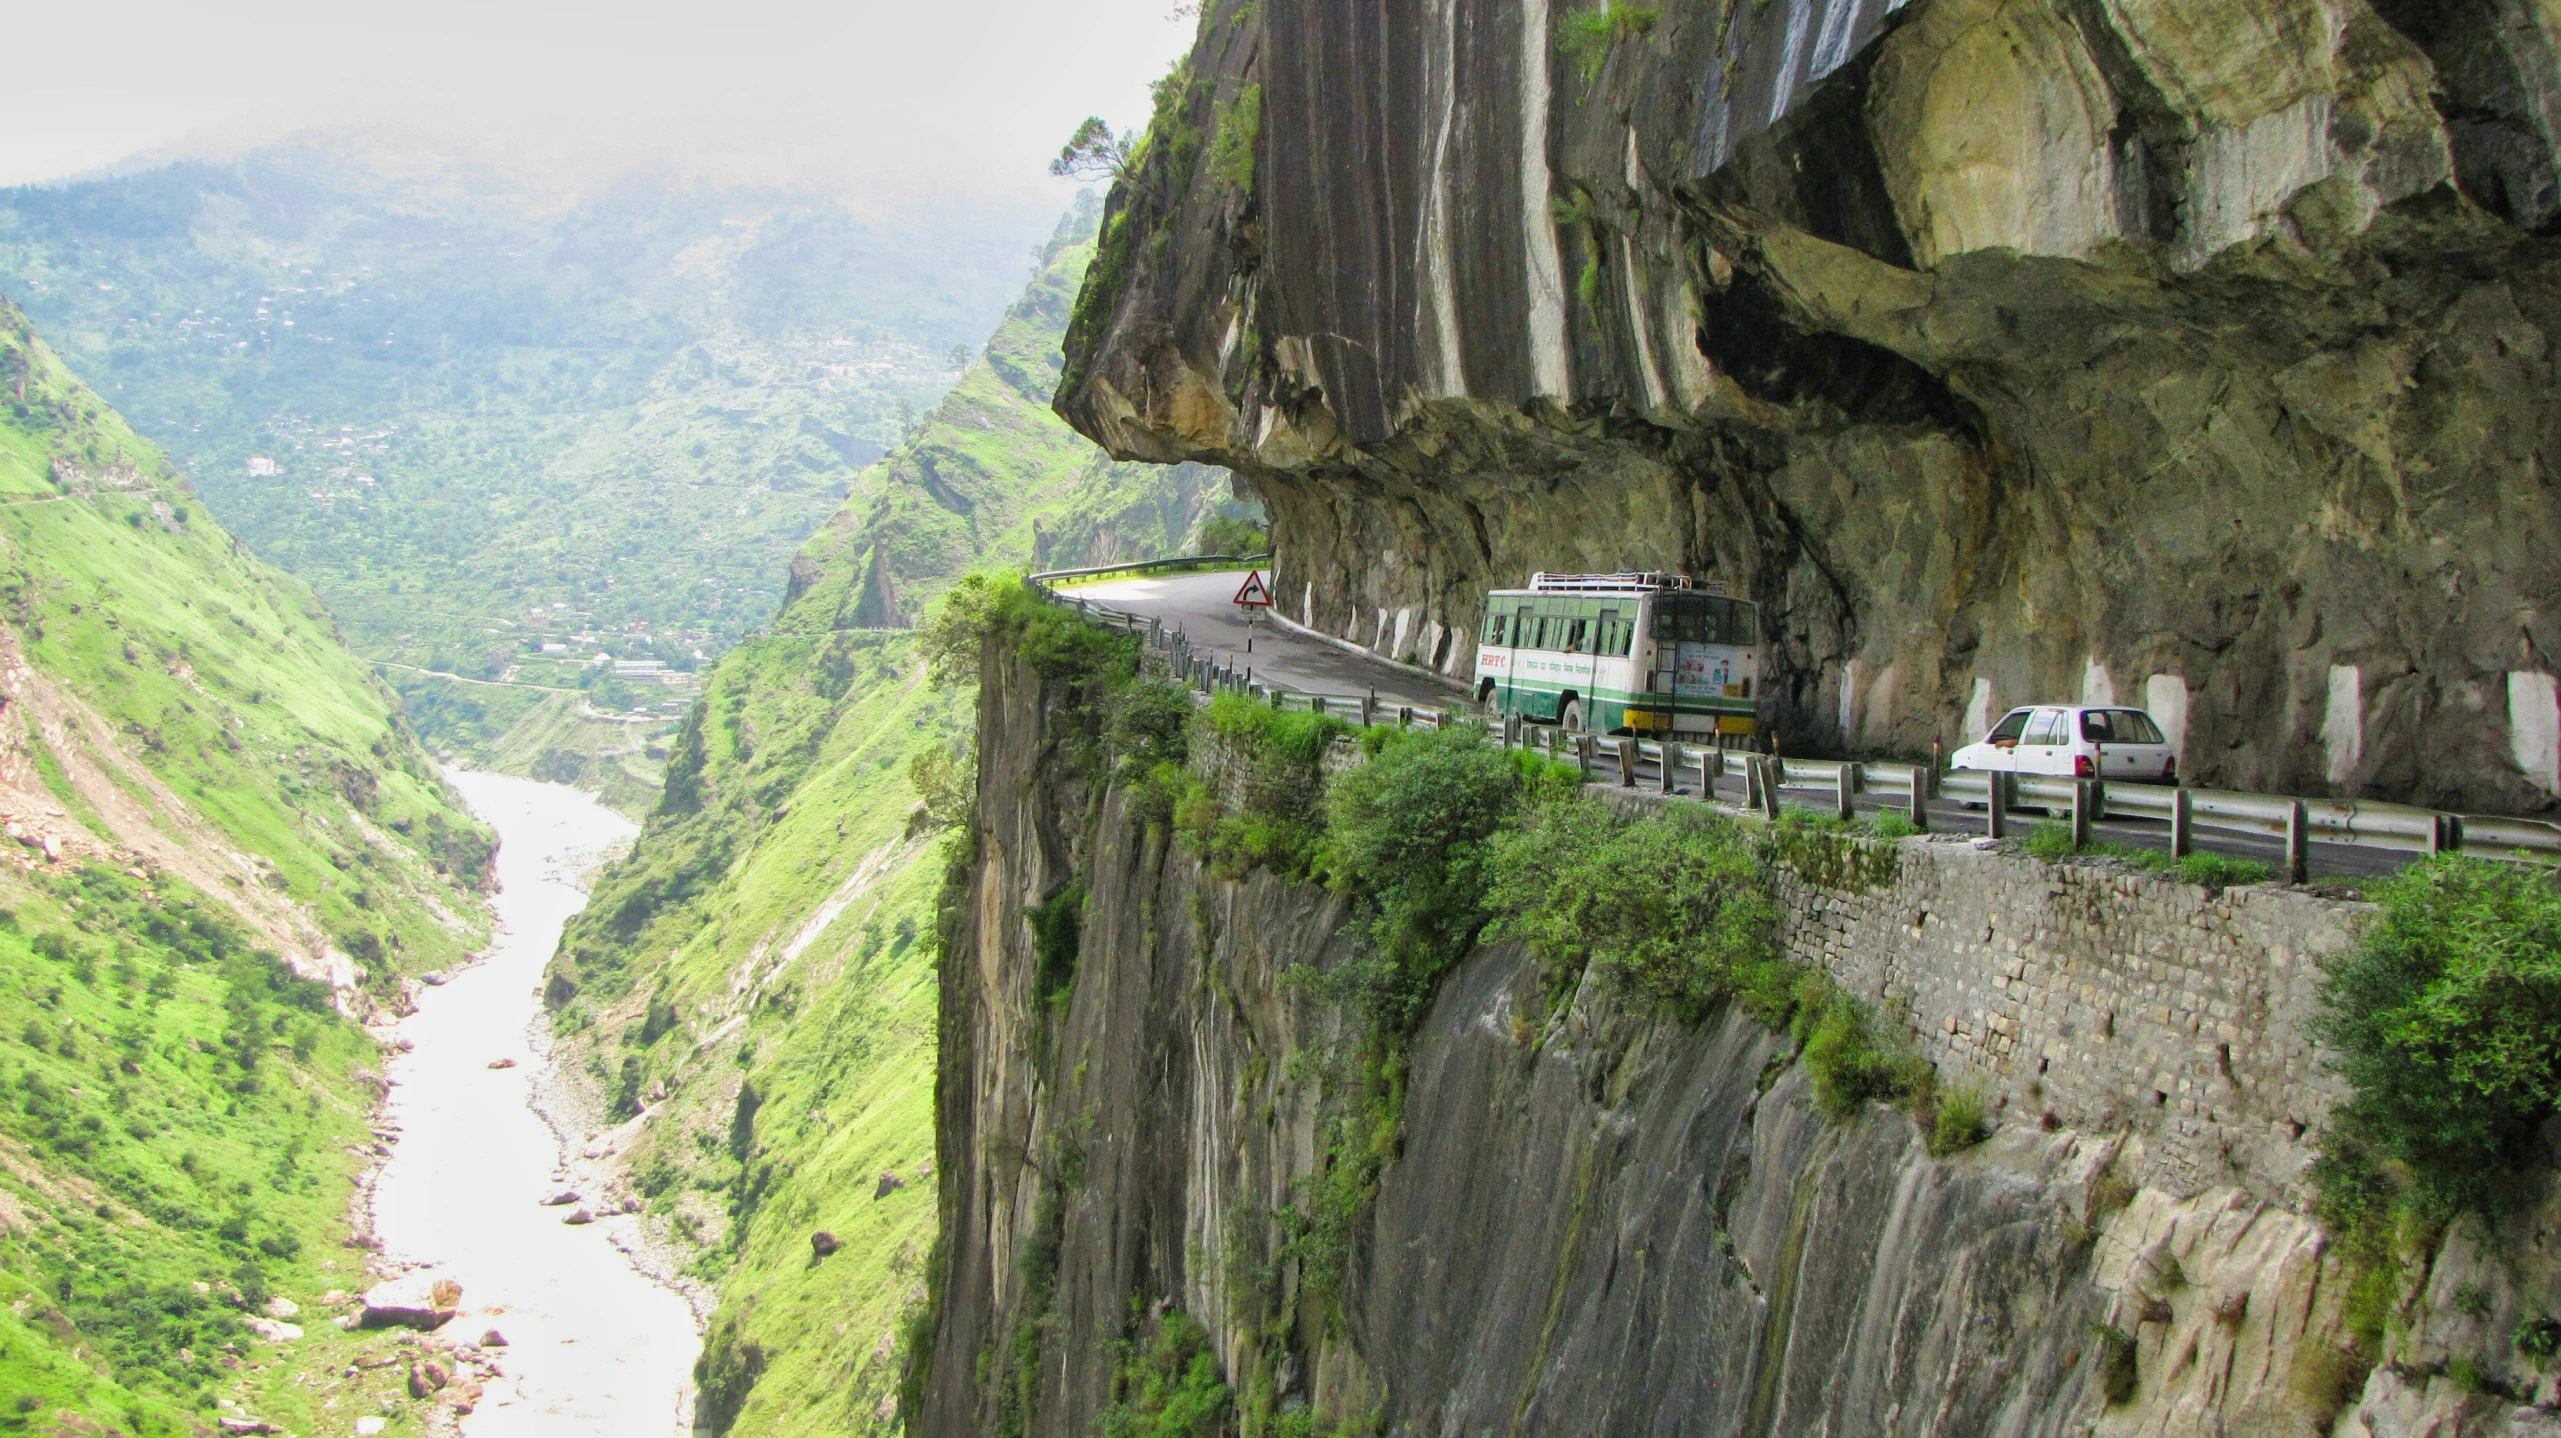 cars are on a road on top of cliffs